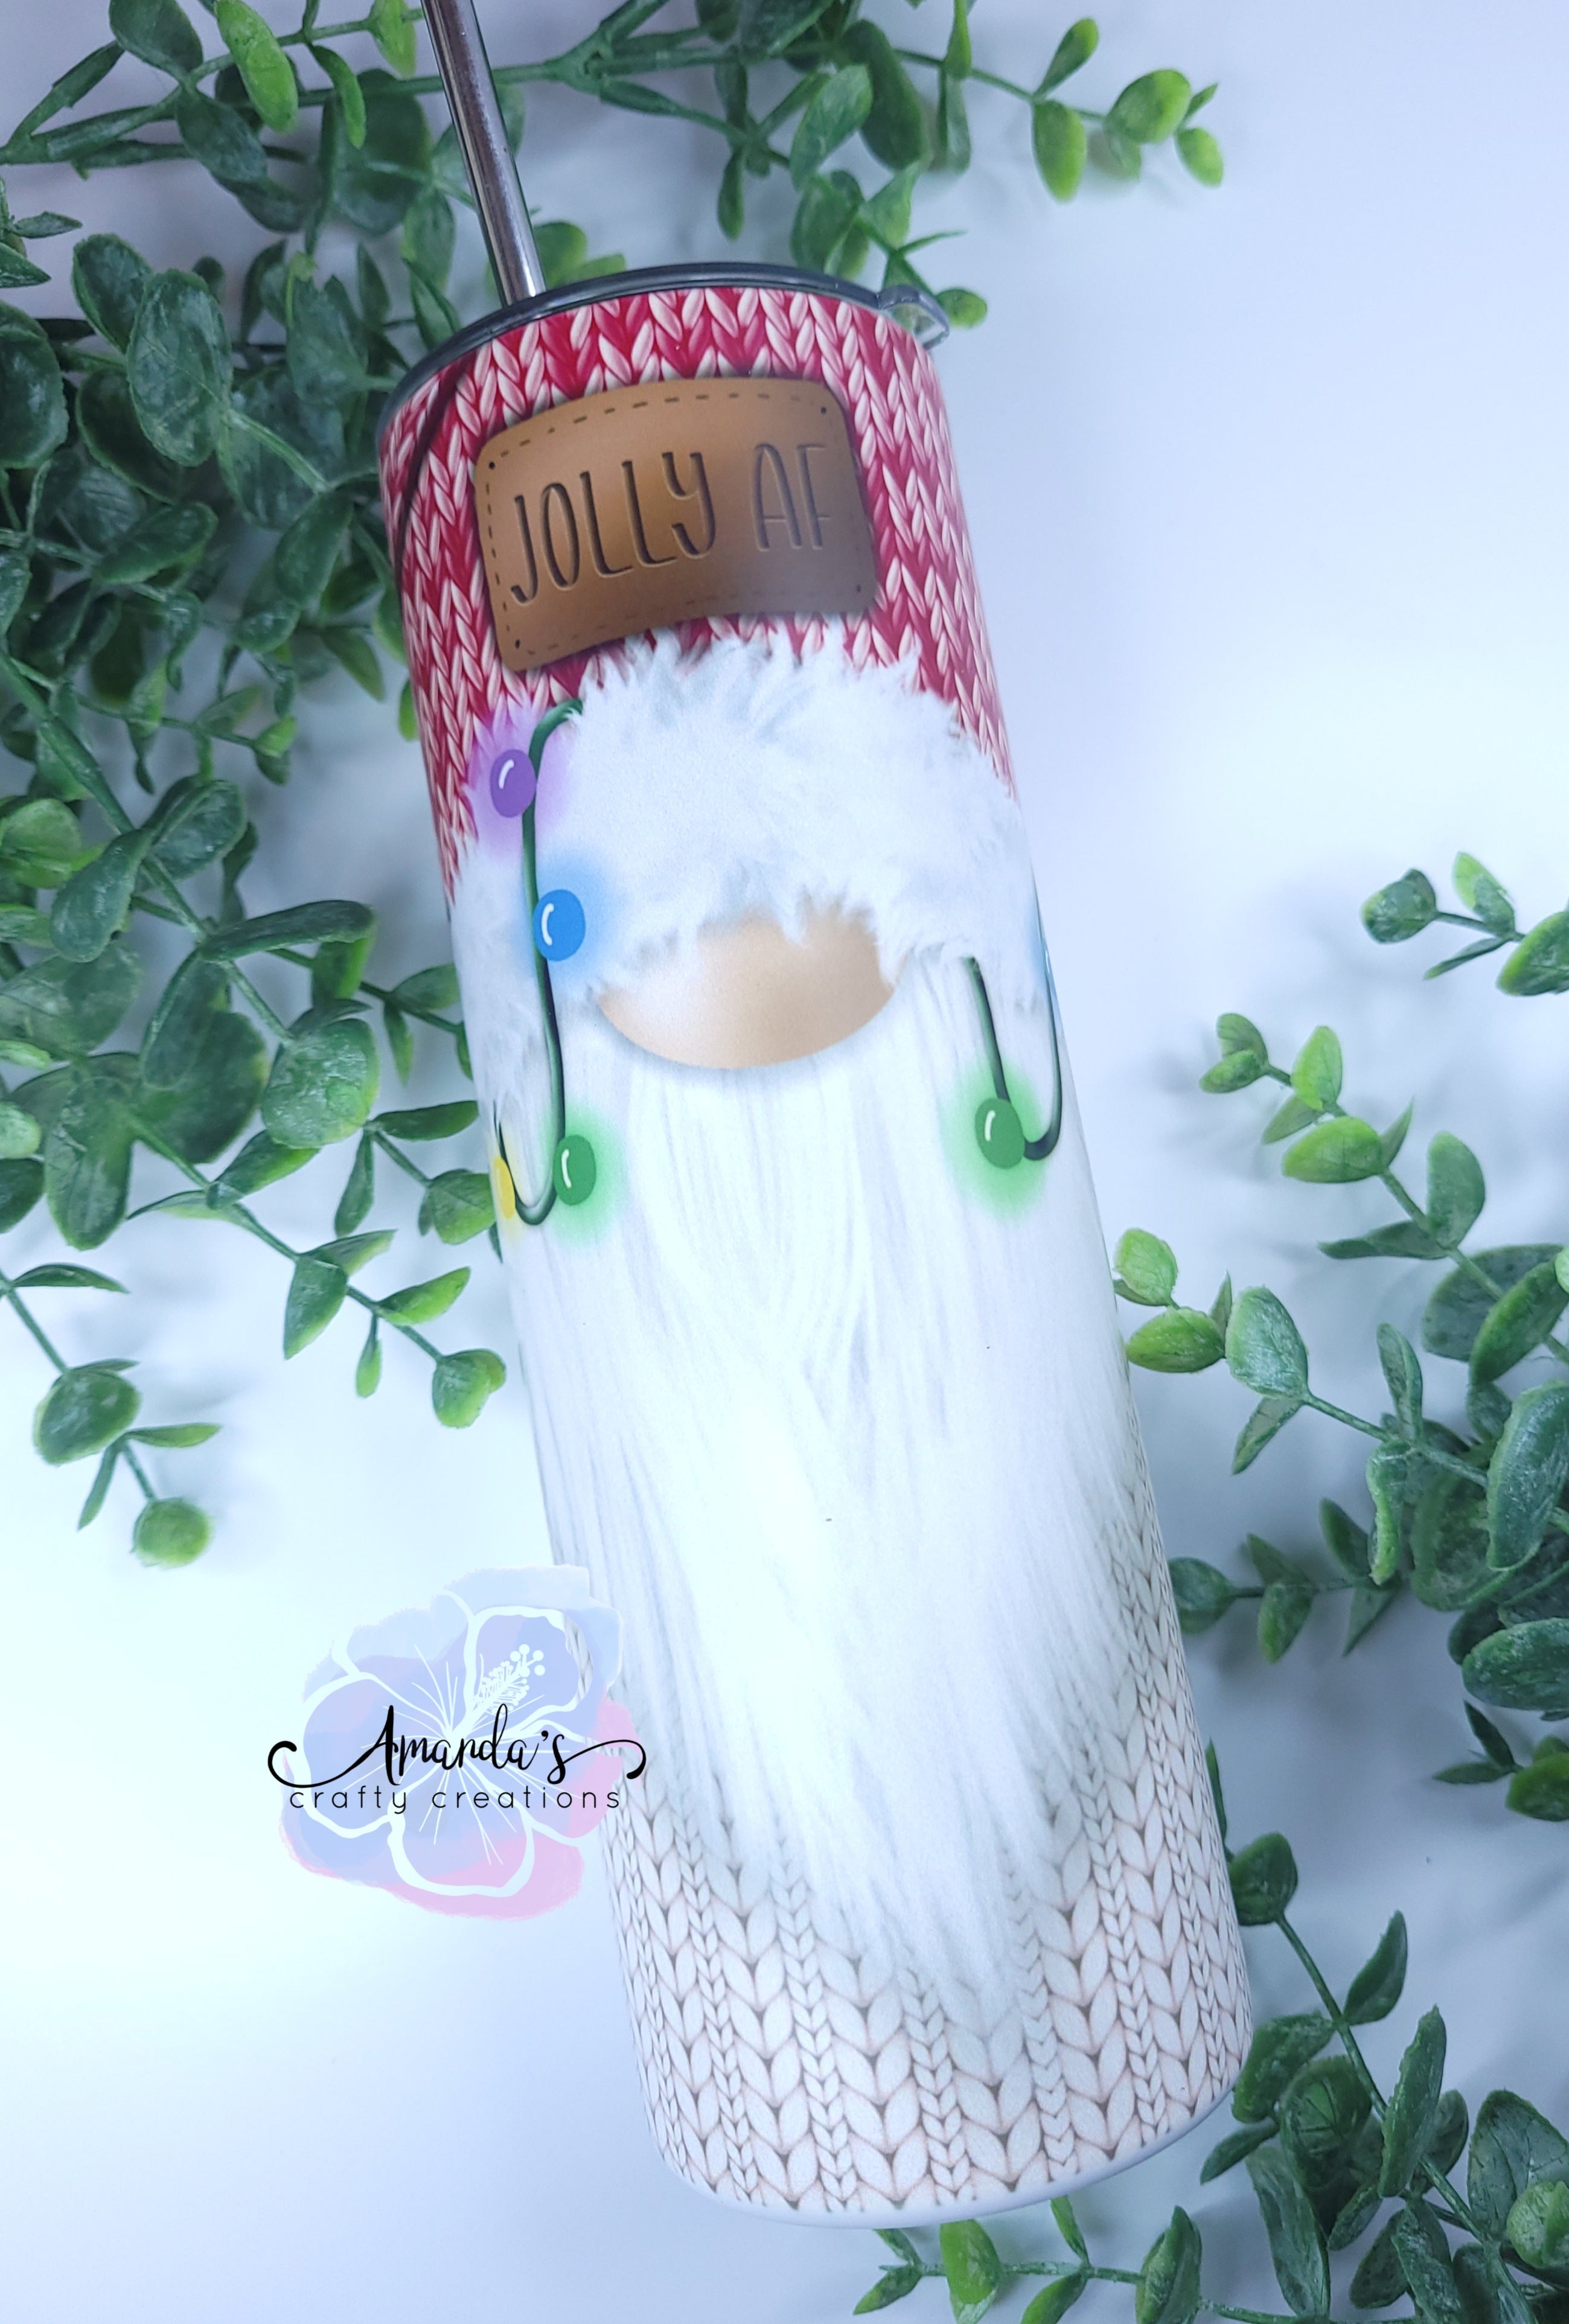 Fuzzy Gnome Easter Tumbler (T173) – Swiit Creations